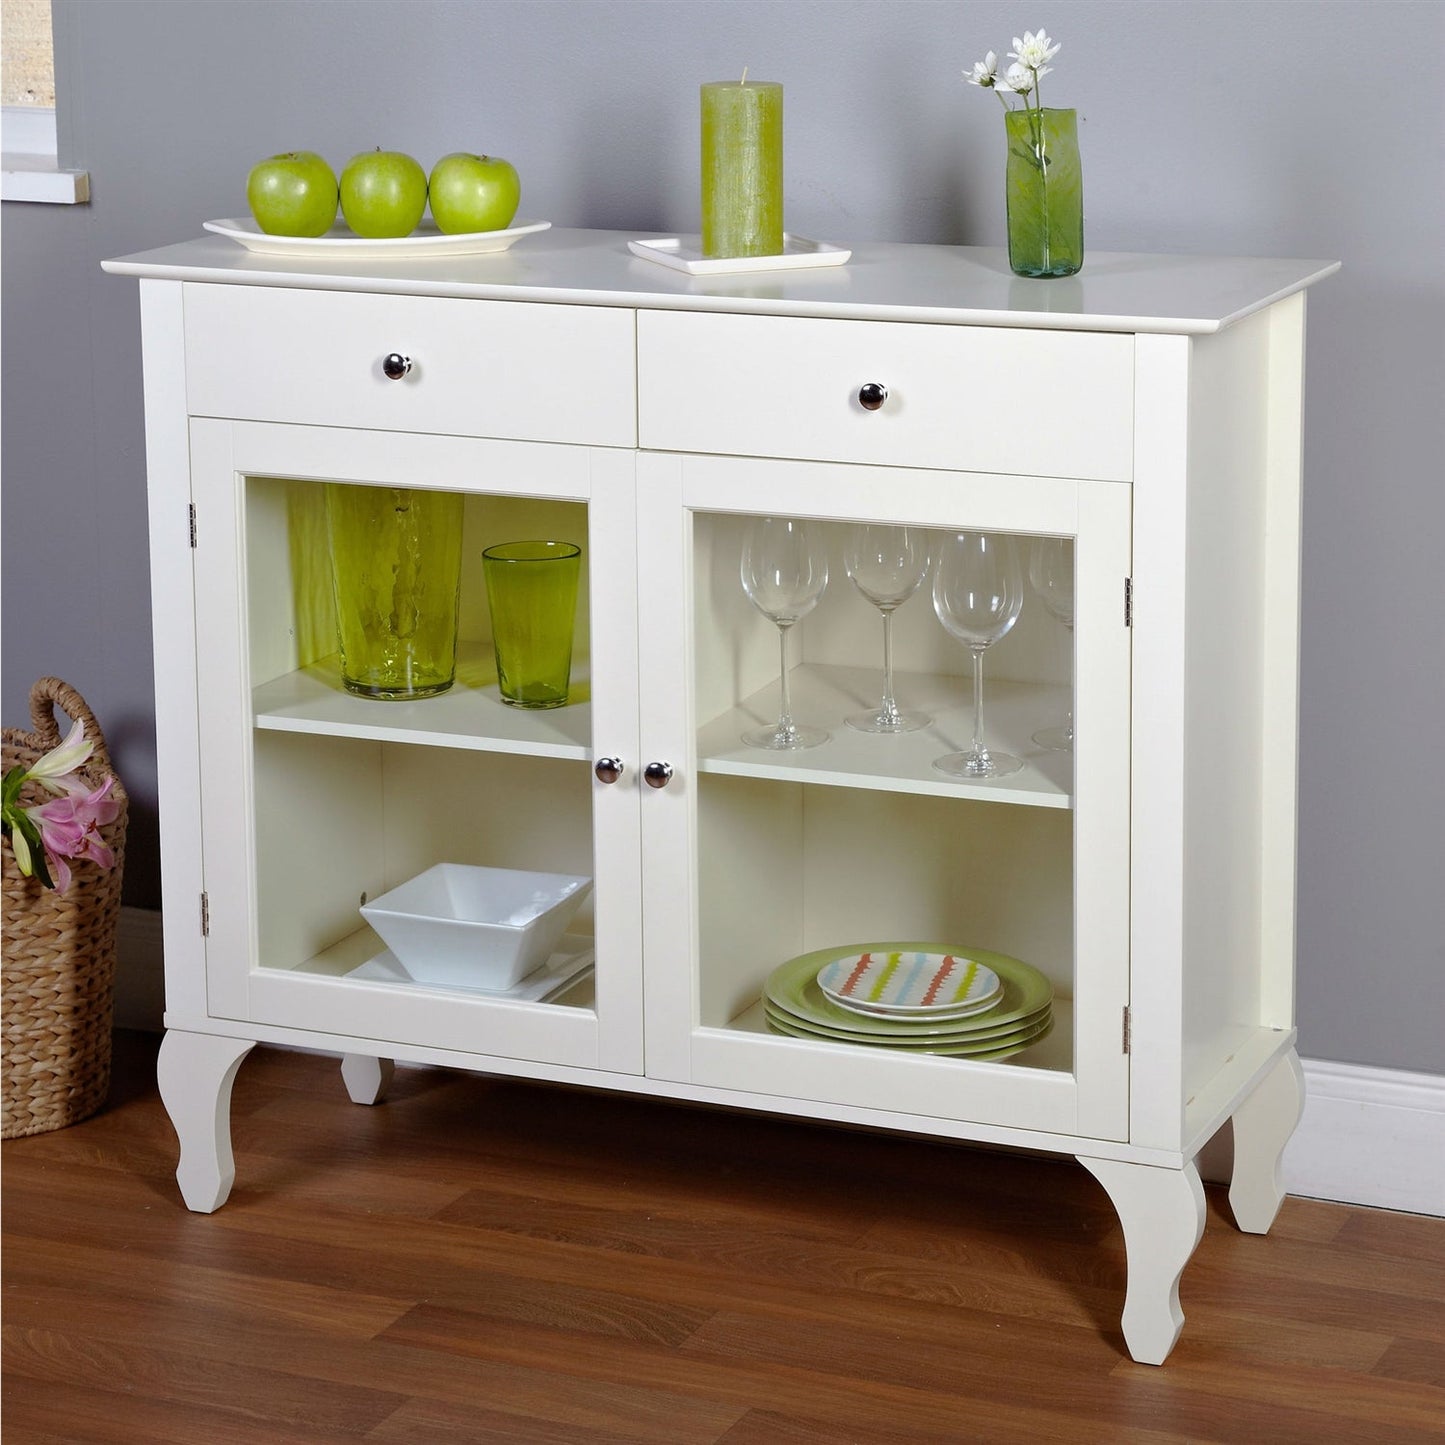 Dining > Sideboards & Buffets - Antique White Sideboard Buffet Console Table With Glass Doors